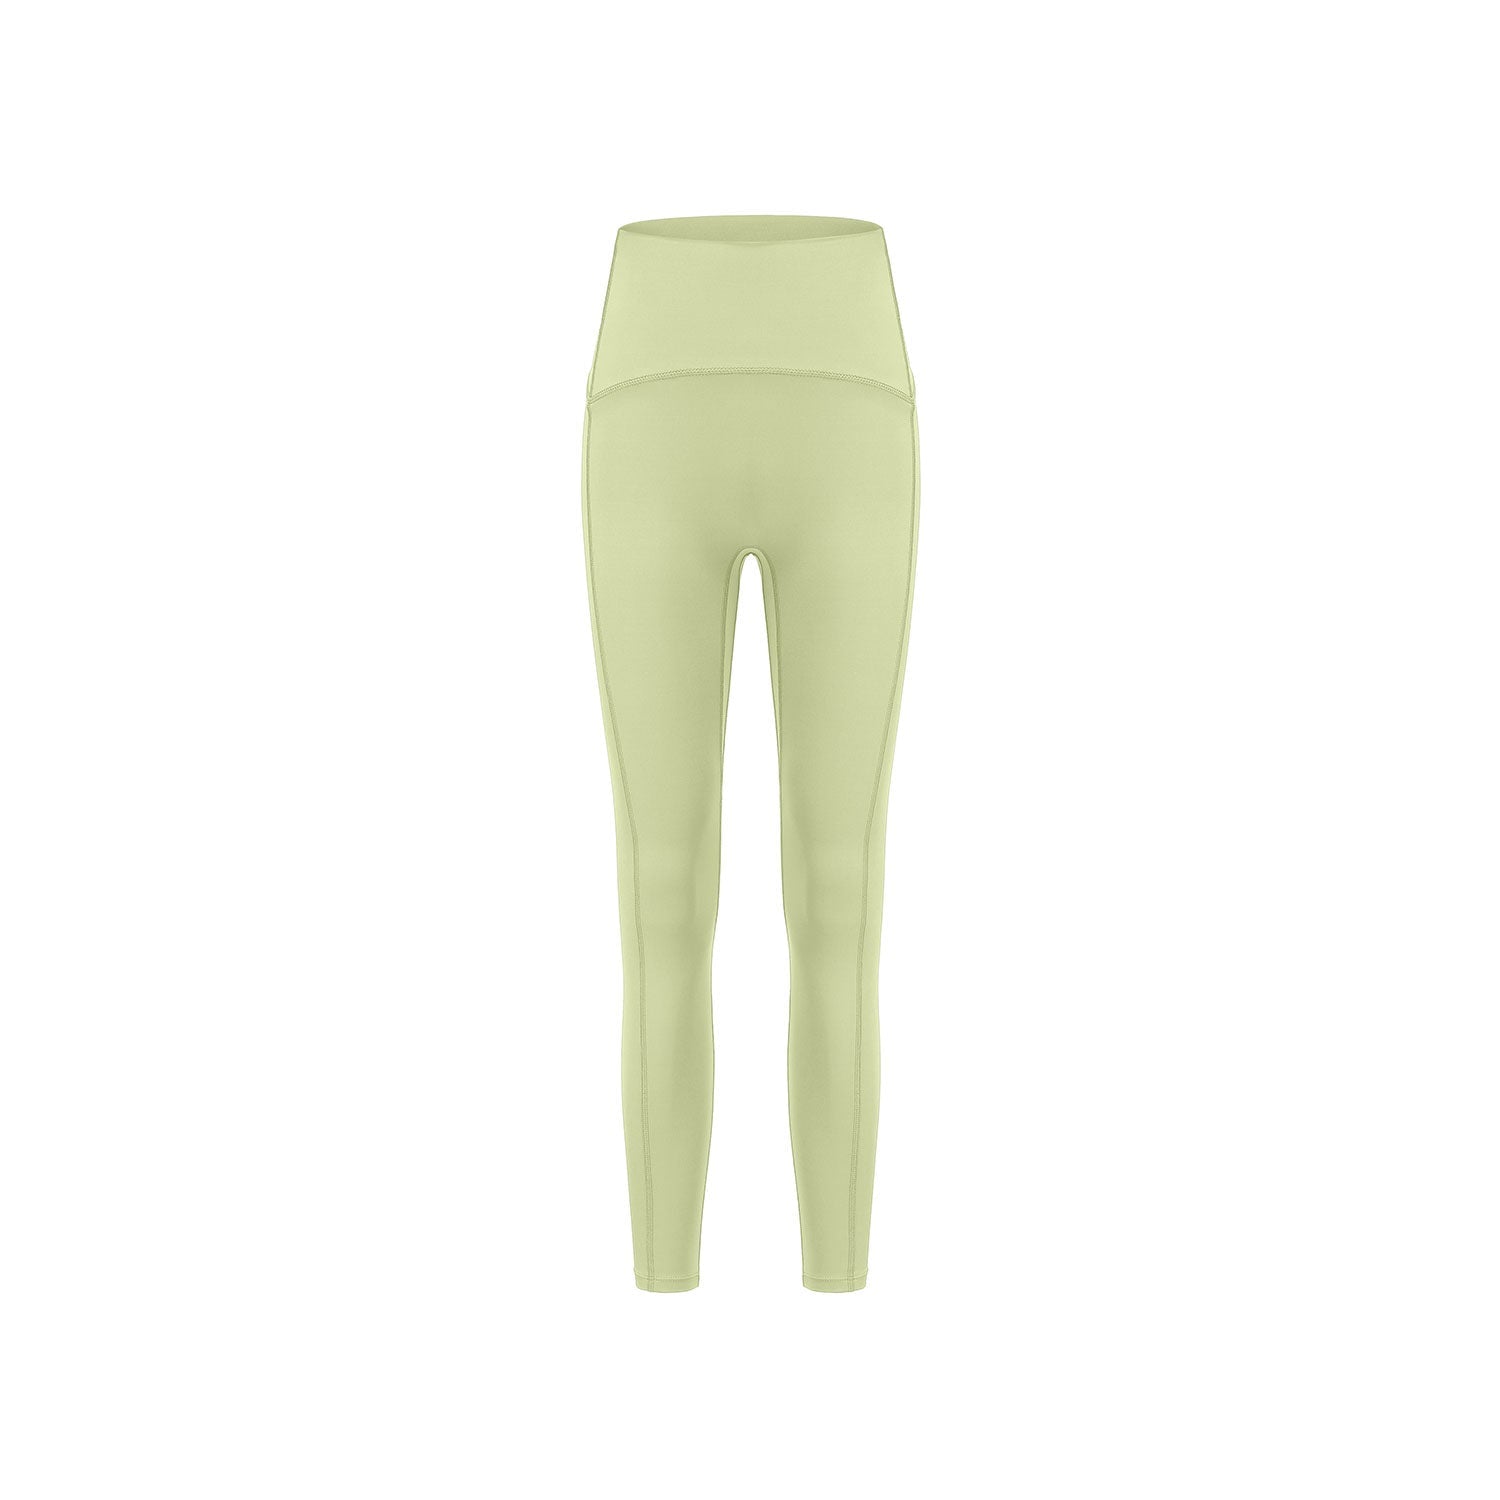 Buy Elastic High-Waist Fitness Tight Pants by Body404